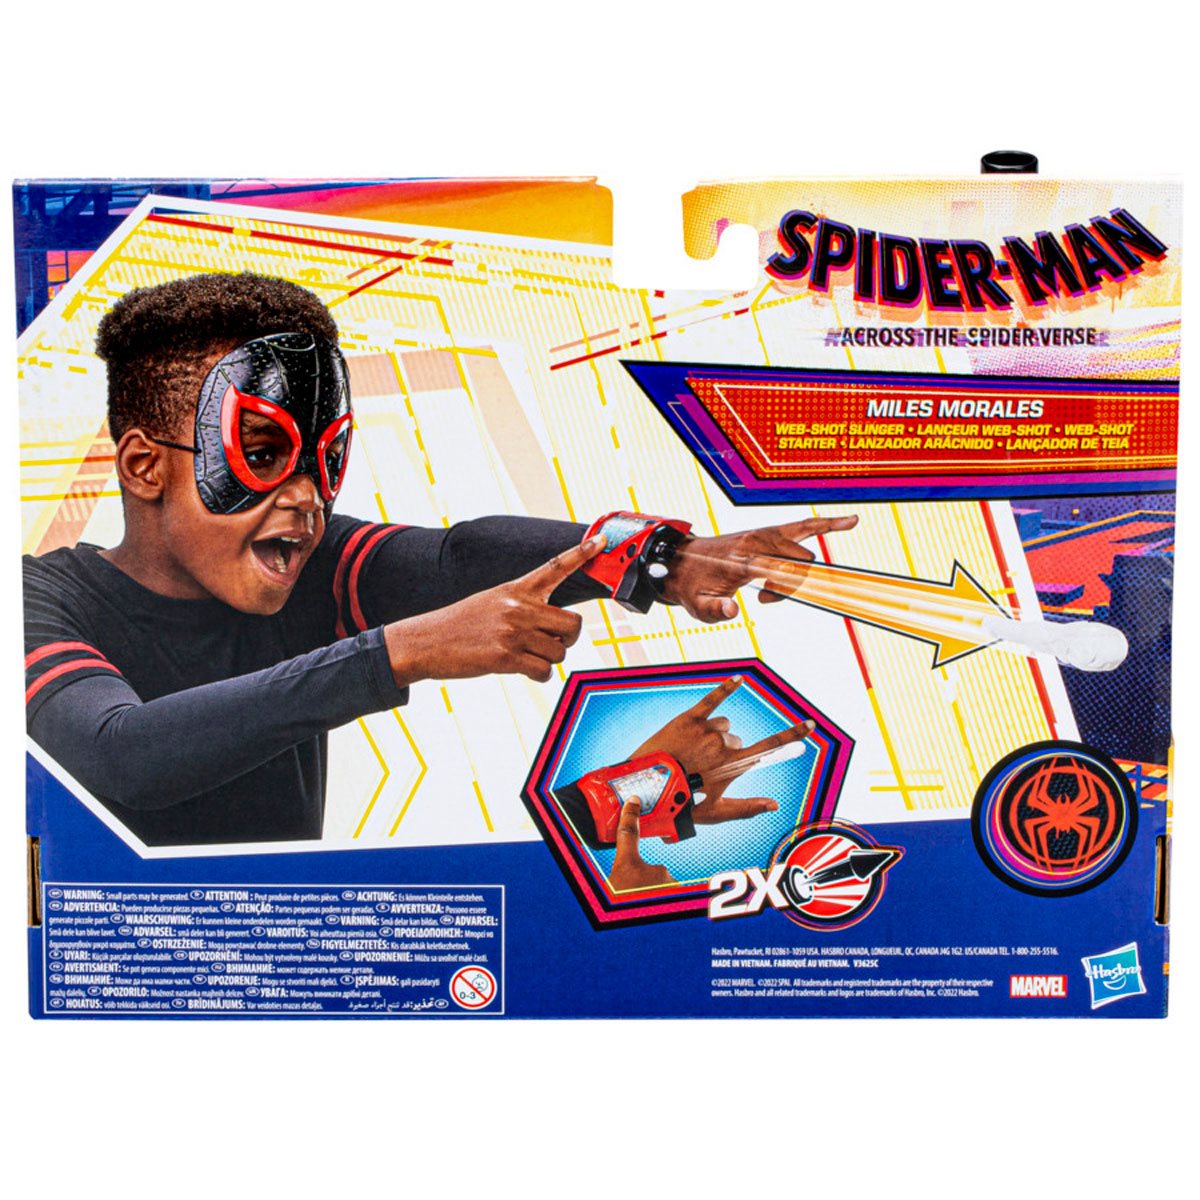 Spider-Man: Across The Spider-Verse Miles Morales Nerf MicroShots